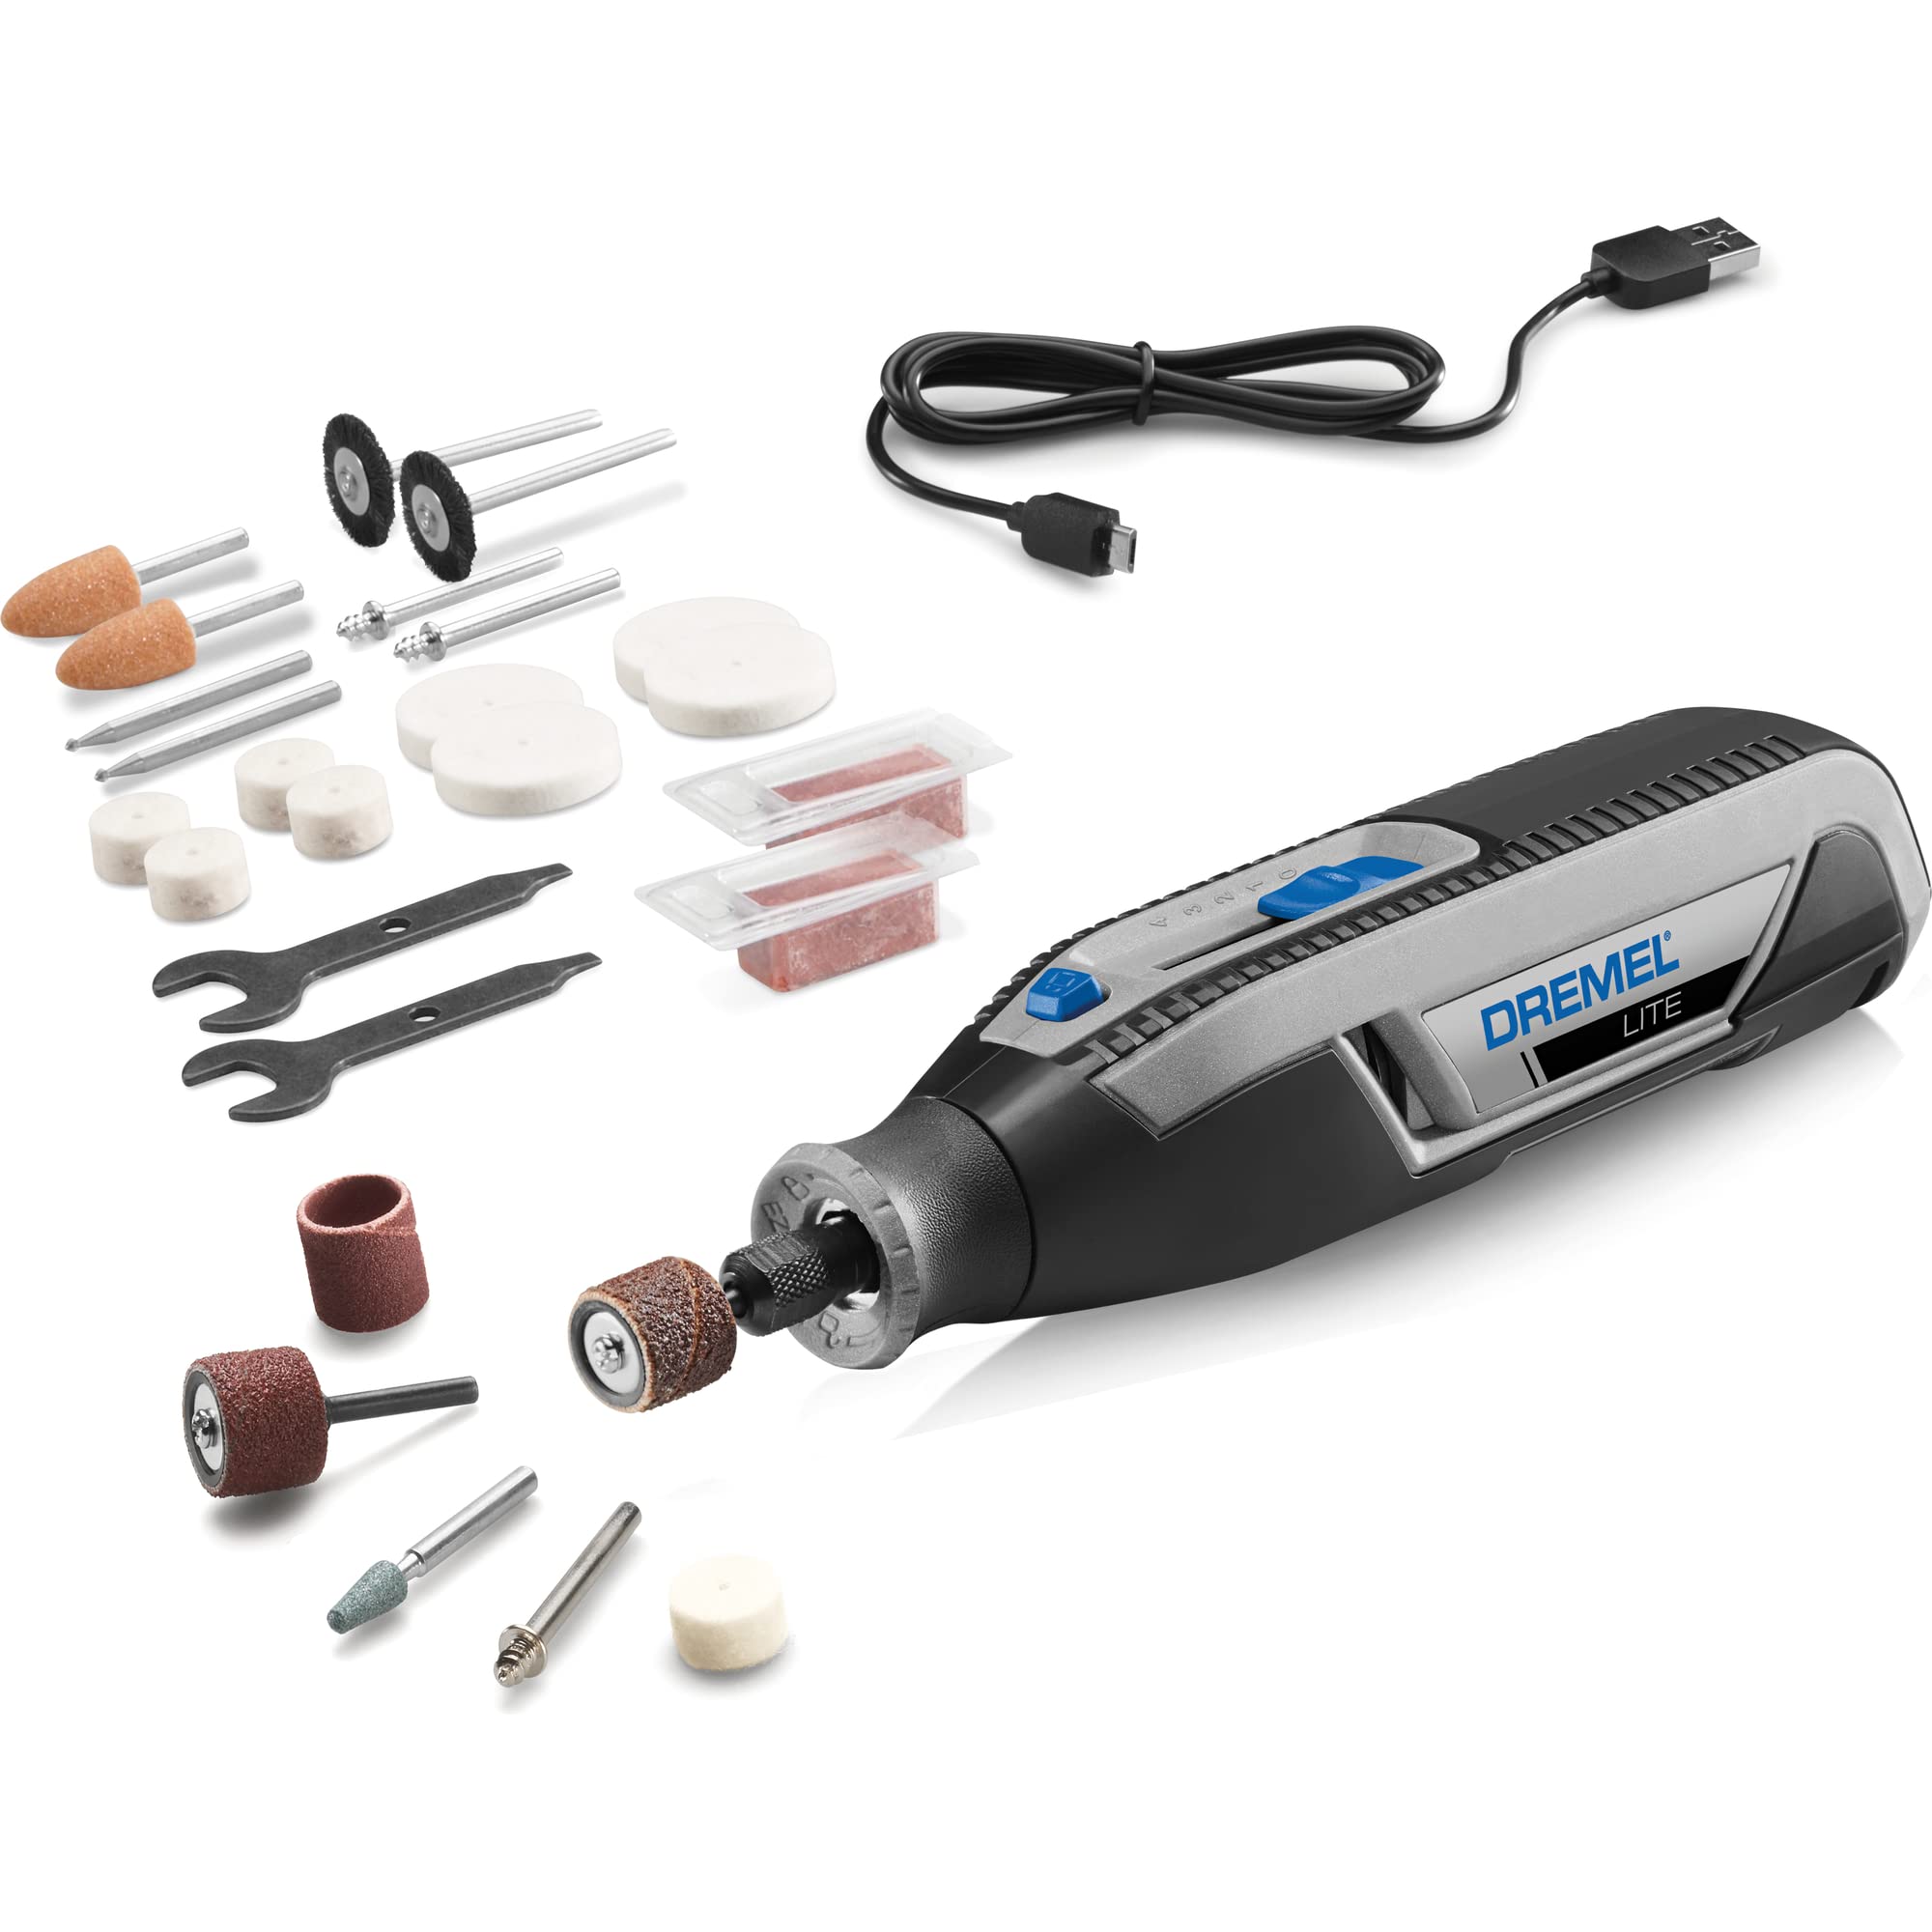 Dremel Lite 7760-N25 Cordless Rotary Tool Kit with Variable Speed USB Charging Easy Accessory Changes - Perfect For Light-